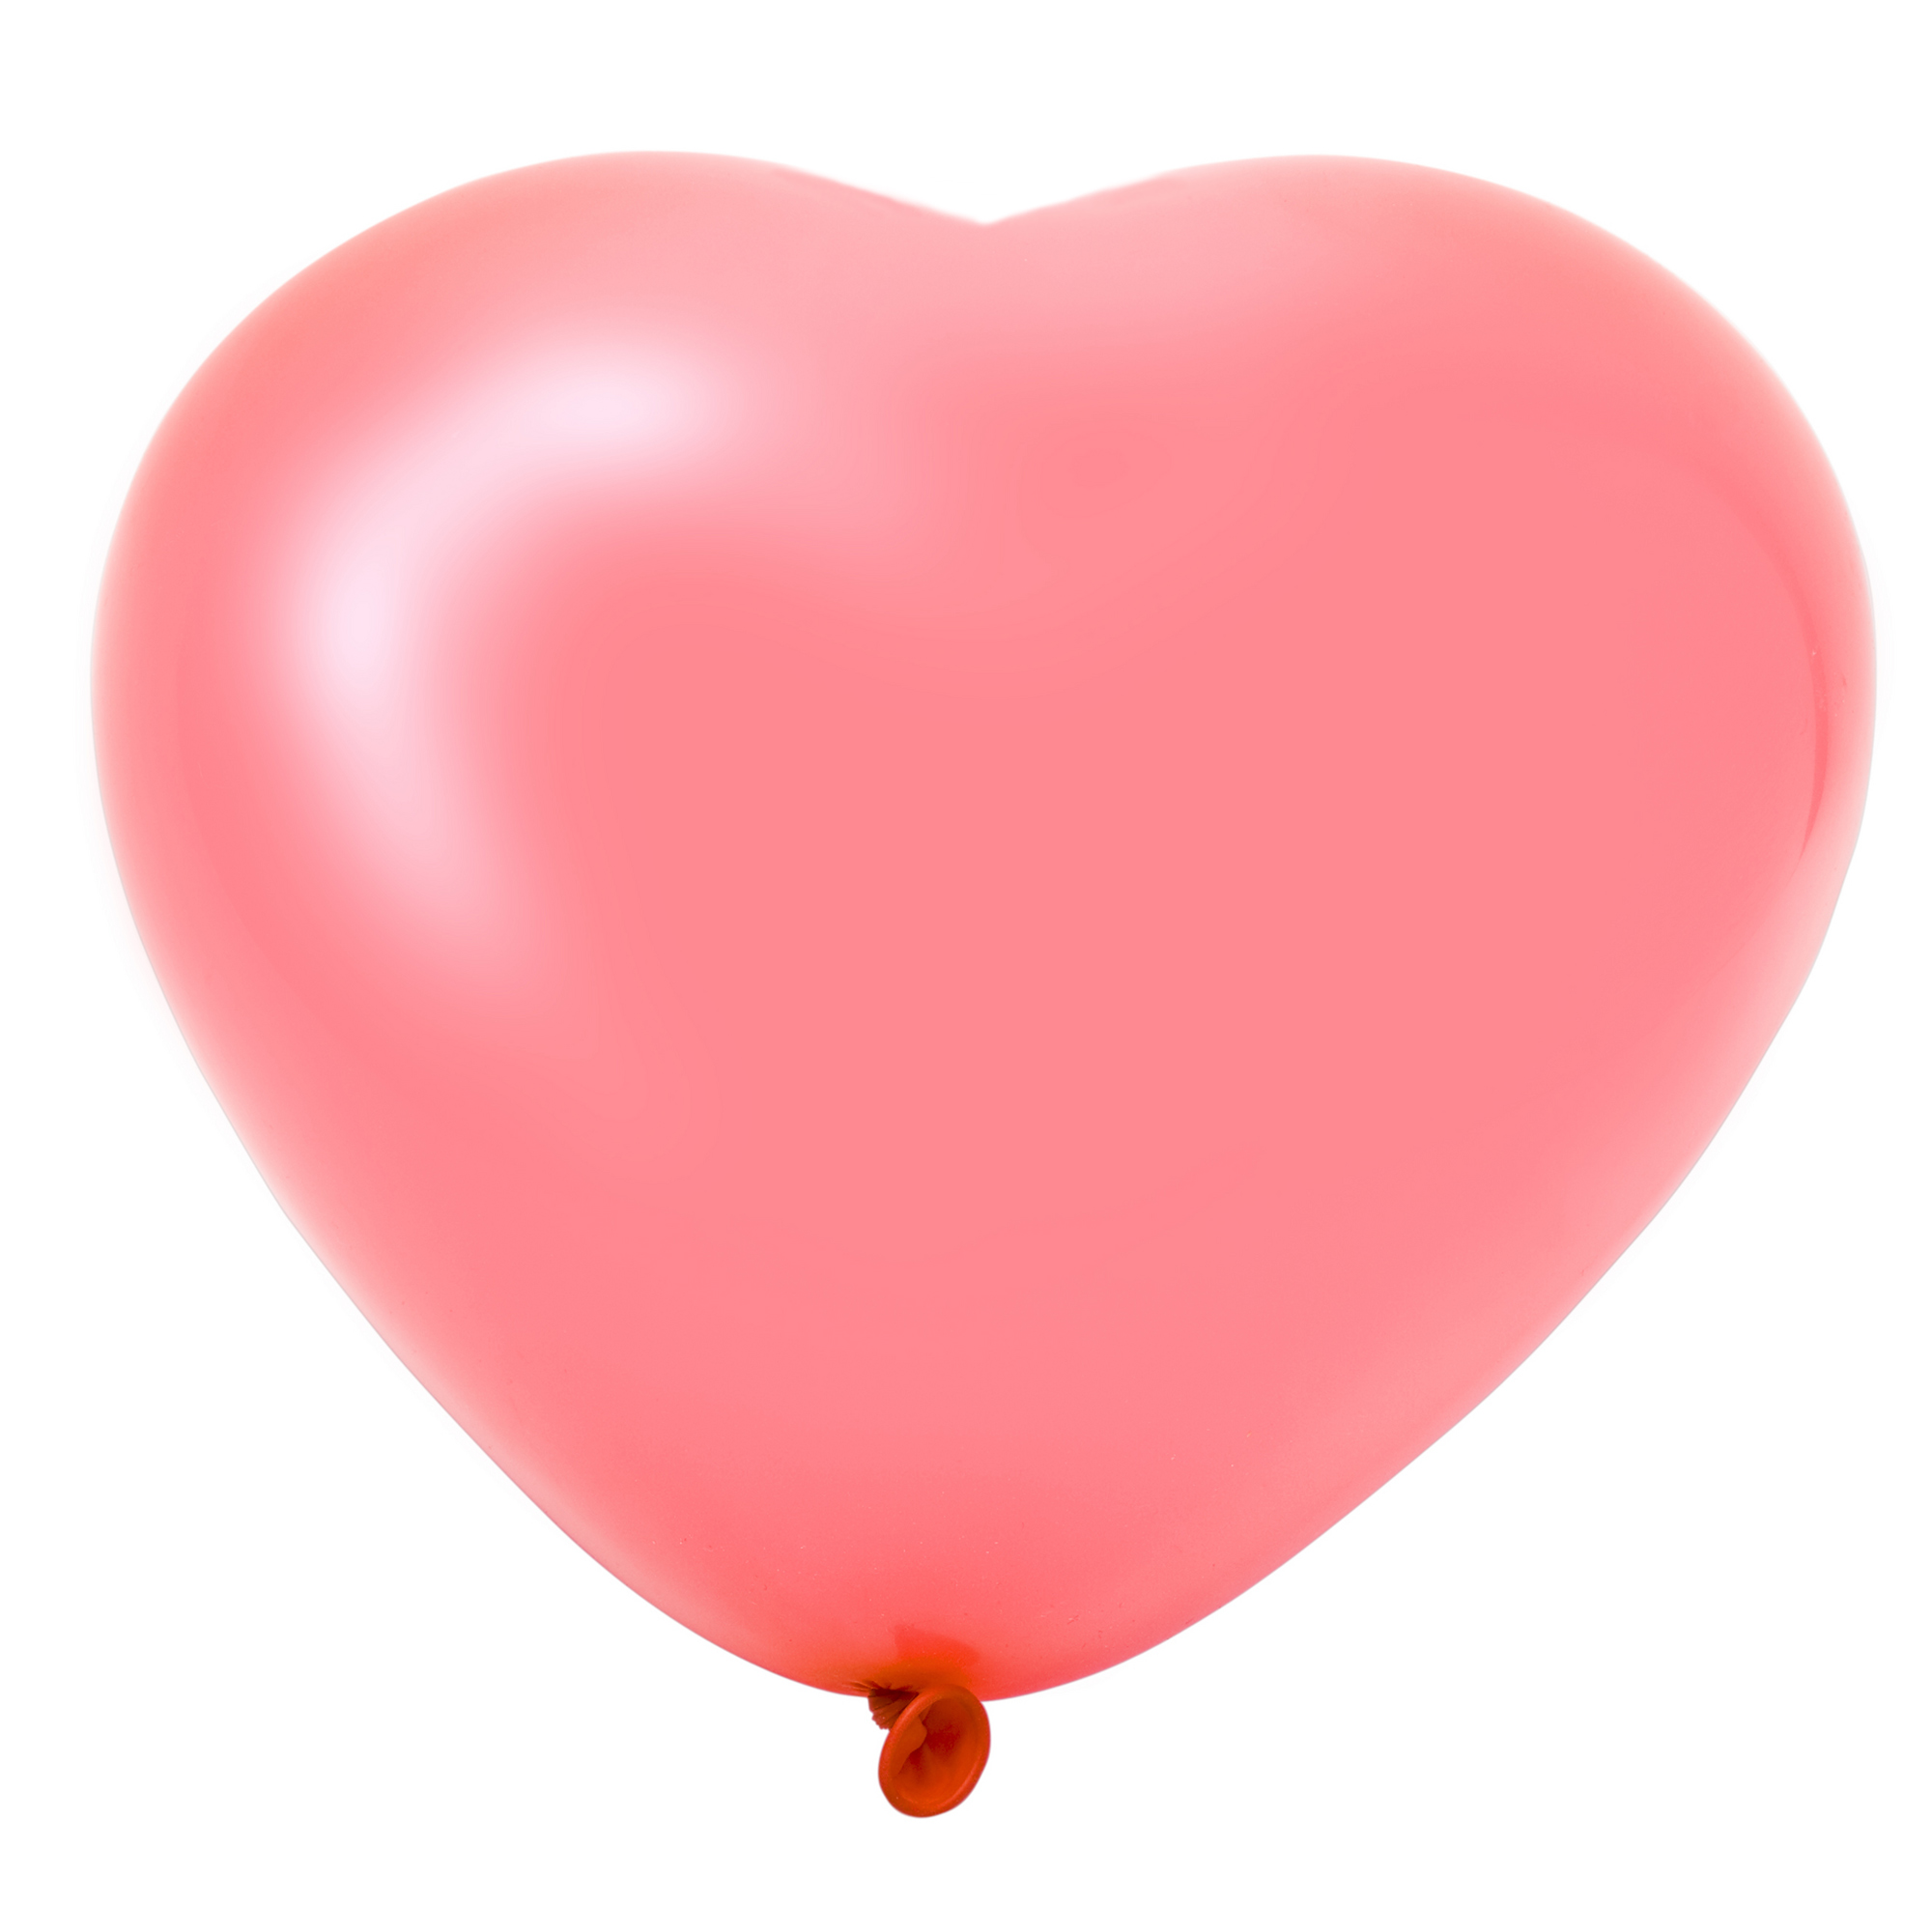 Heart Ballons That Could Send Your Love Anywhere